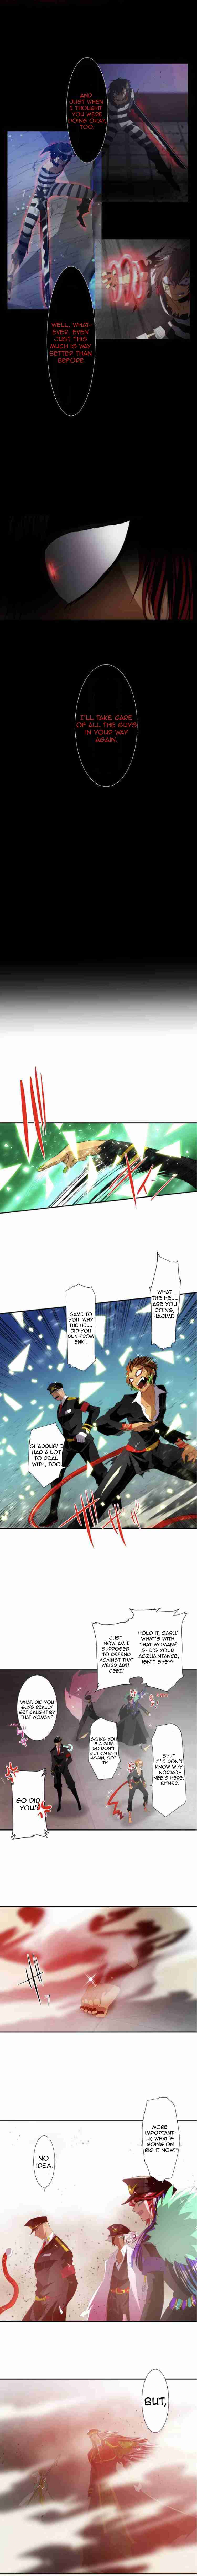 Nanbaka Ch. 119 We're Not Out of the Frying Pan, Yet There's Fire